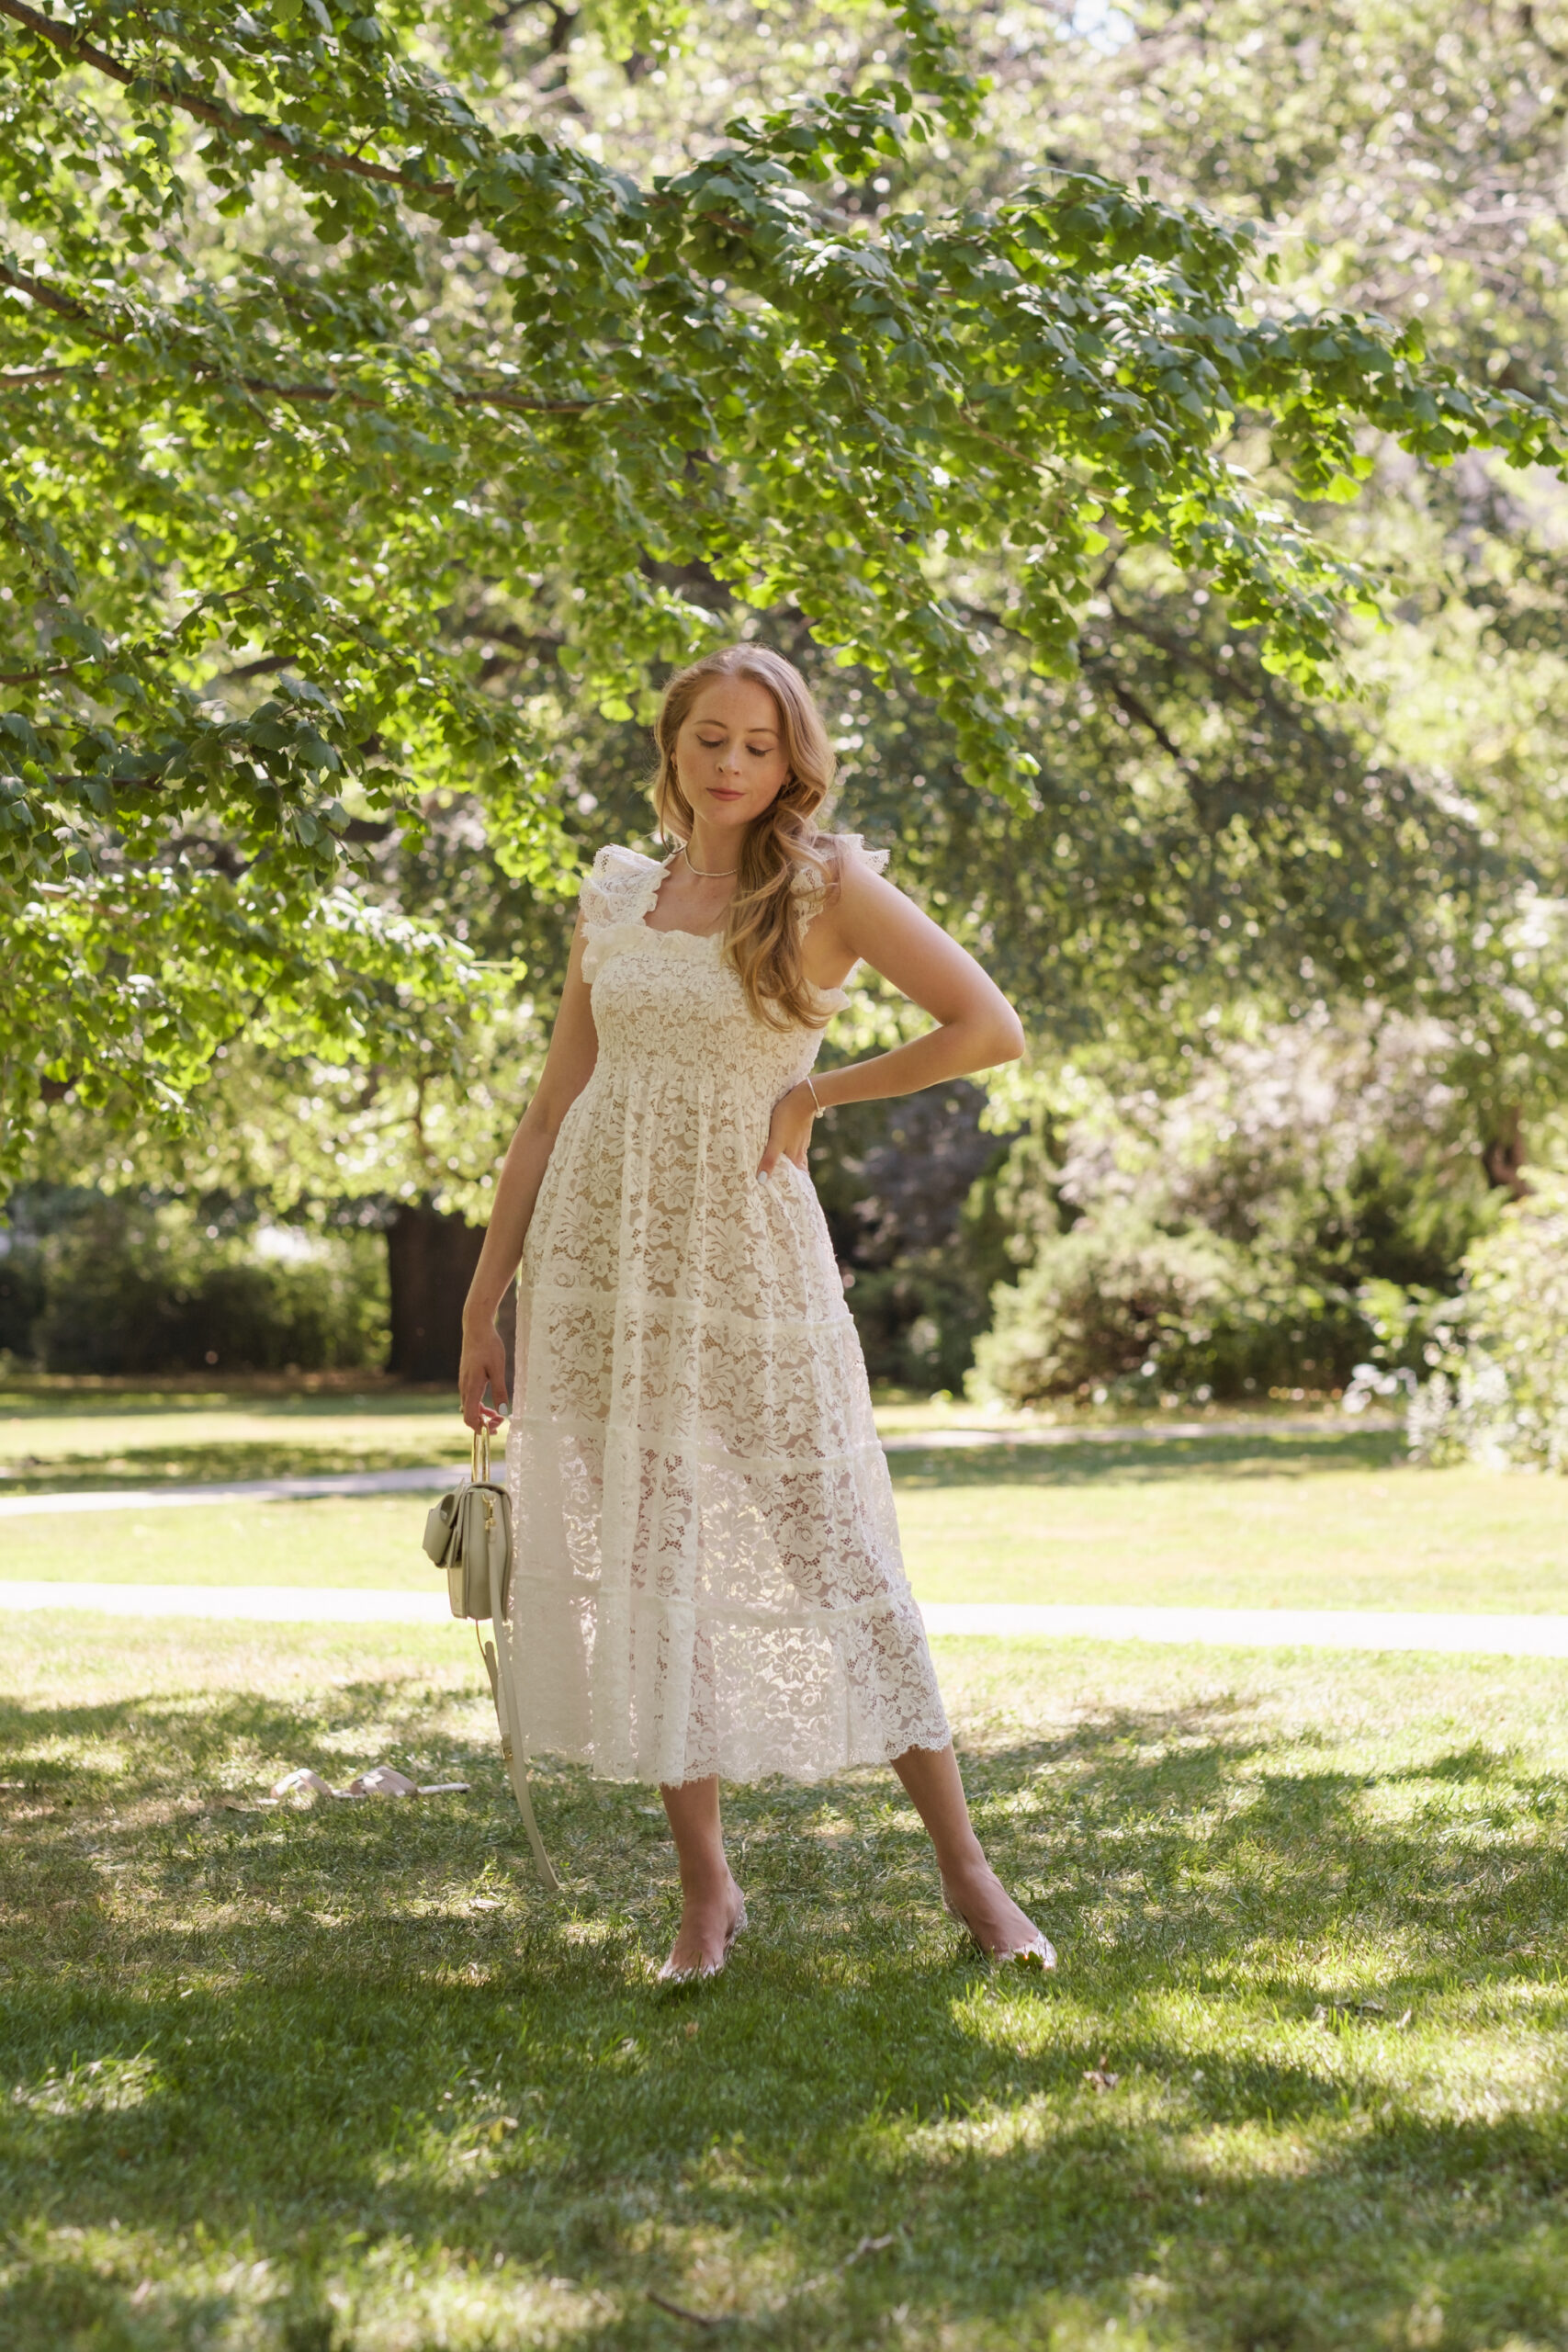 White Lace Nap Dress featuring a see through lace fabric, smocking, stretchy smocked shoulders and a perfect tea length